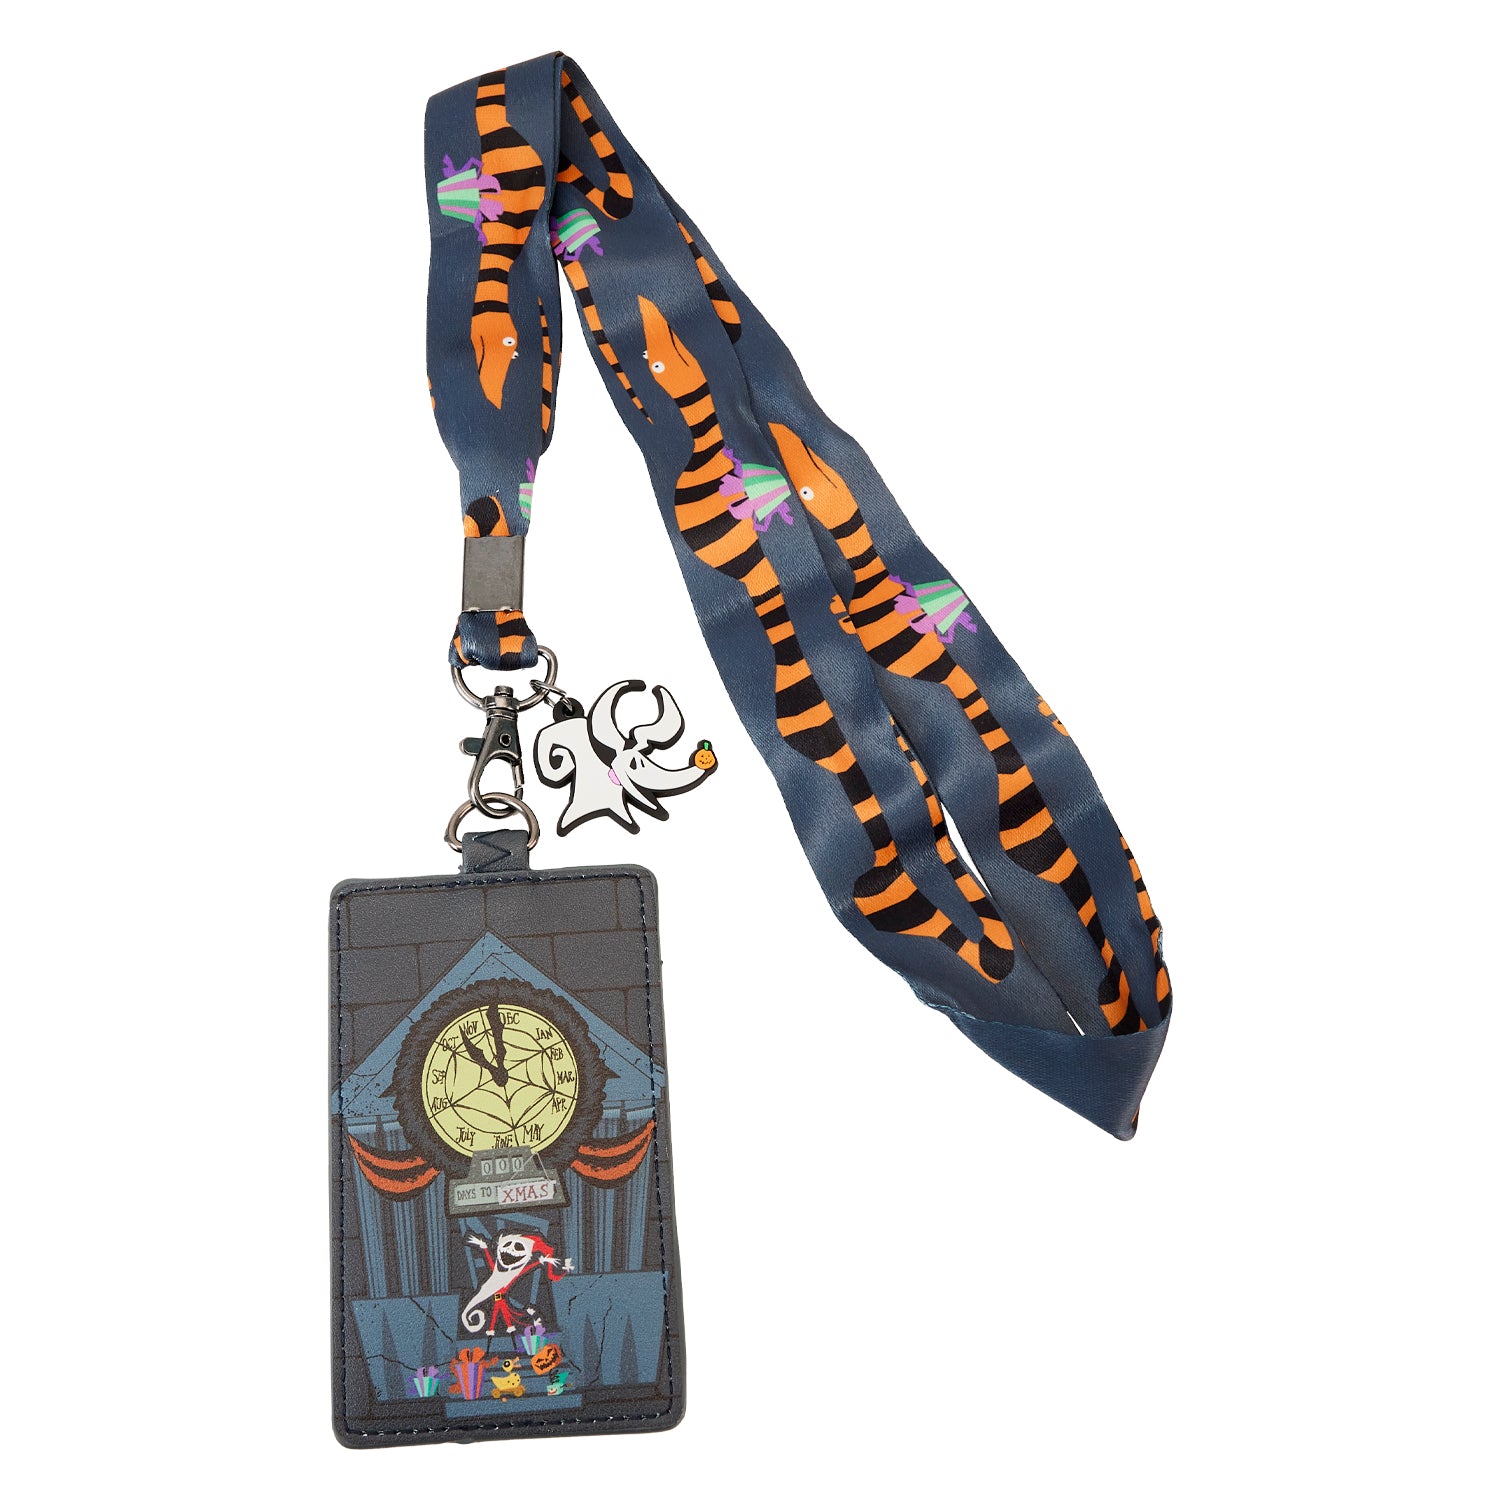 Loungefly Disney Nightmare Before Christmas Lanyard with Cardholder